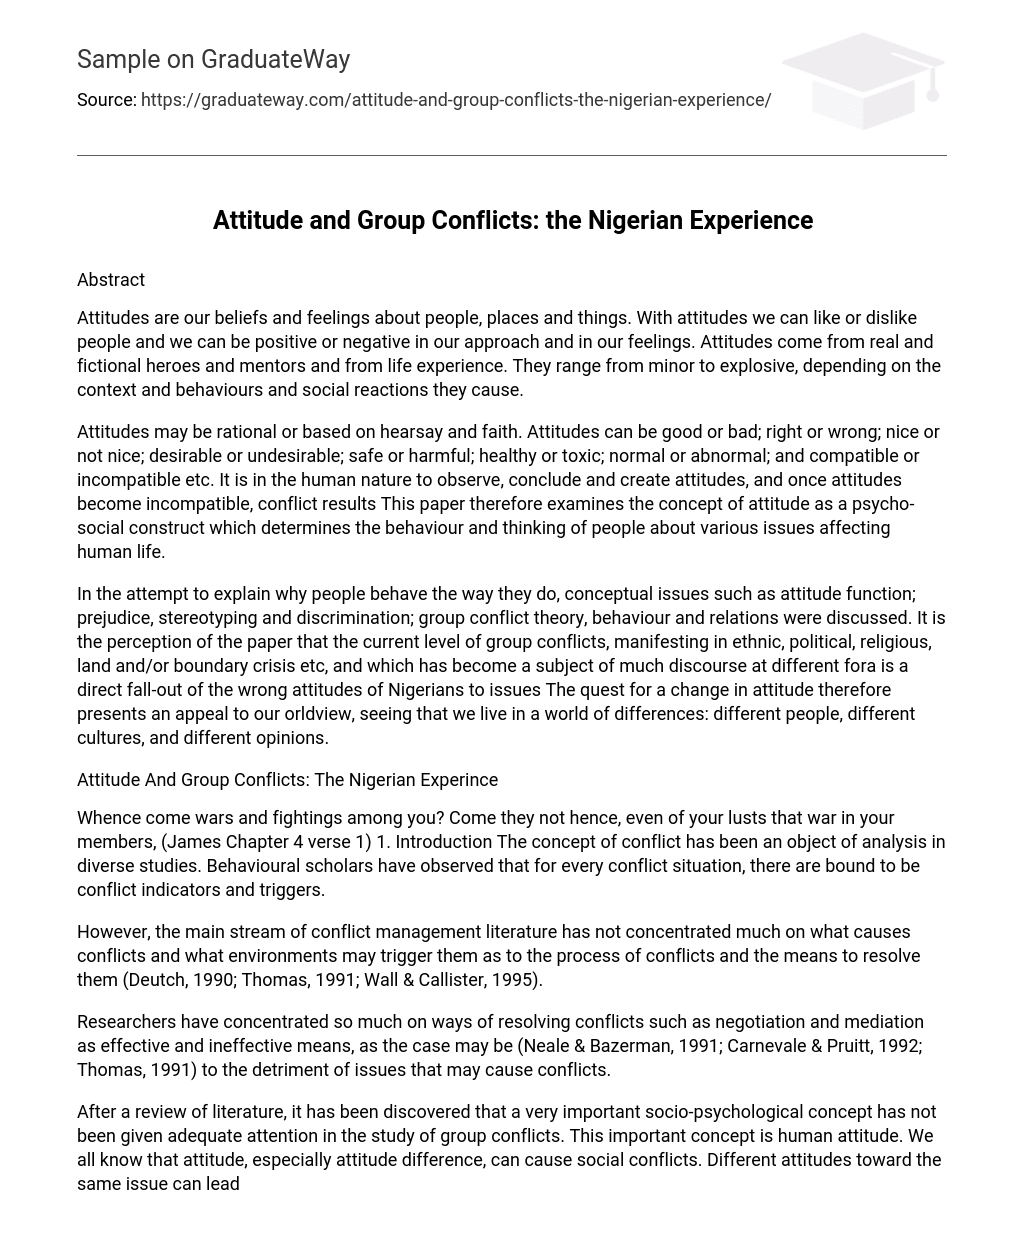 Attitude and Group Conflicts: the Nigerian Experience